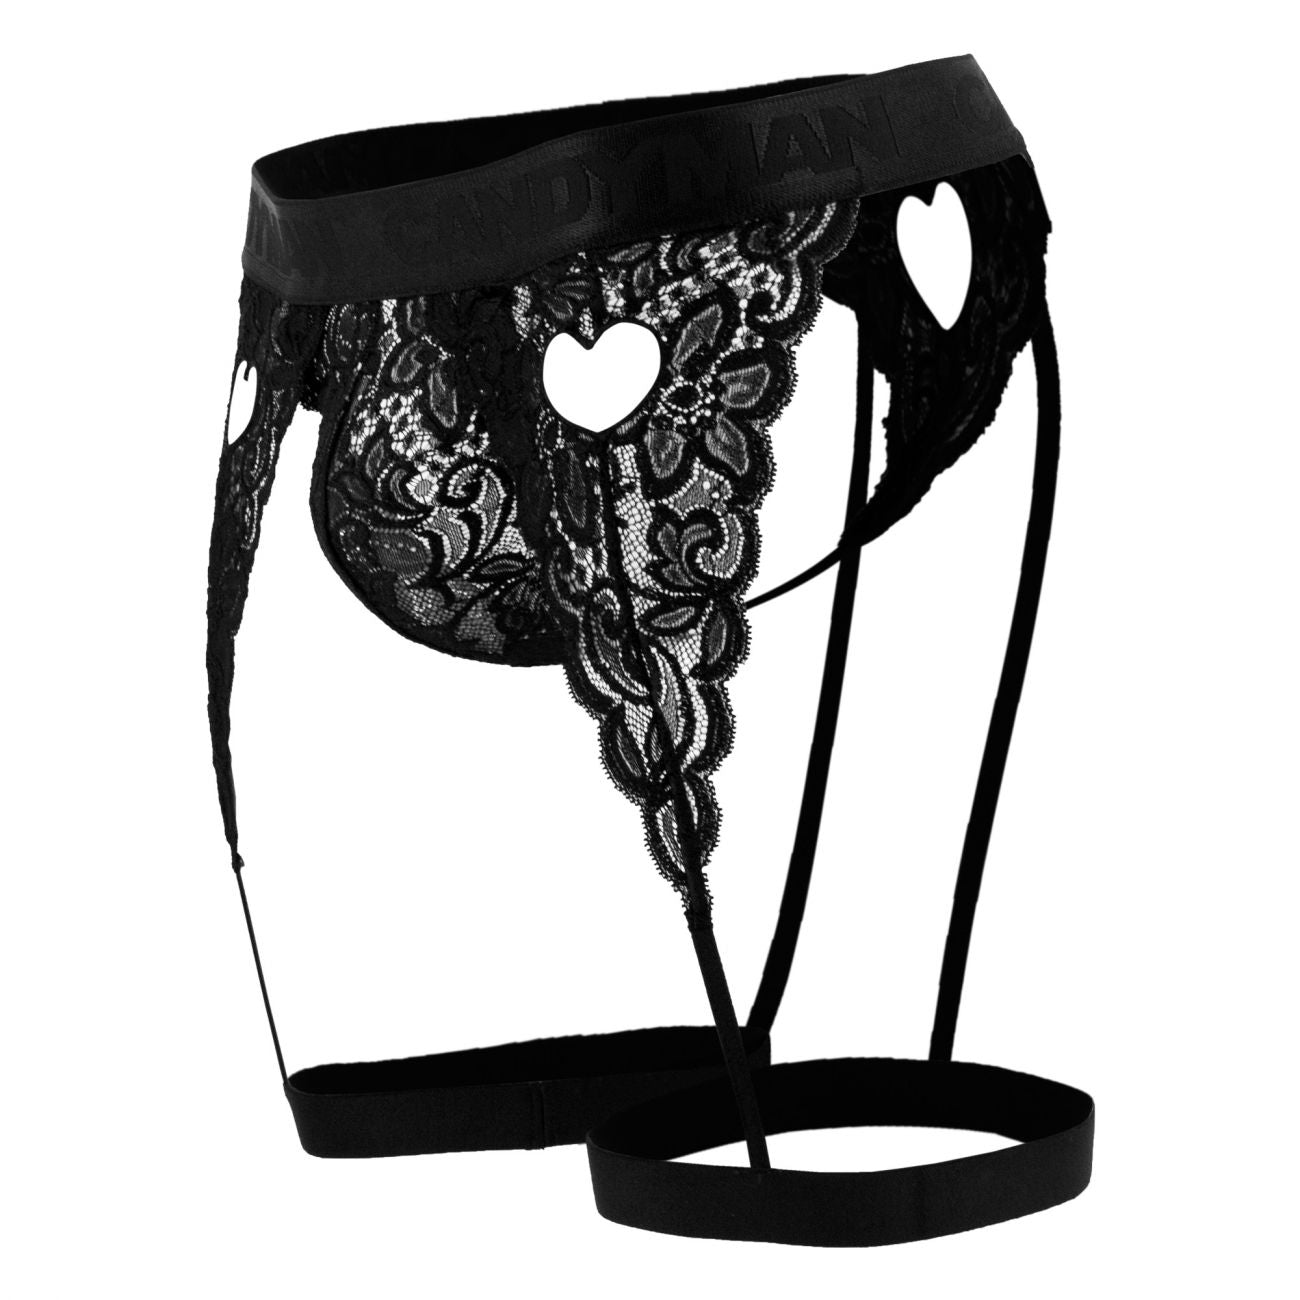 JCSTK - CandyMan 99310 Thong with Attached Garters Black